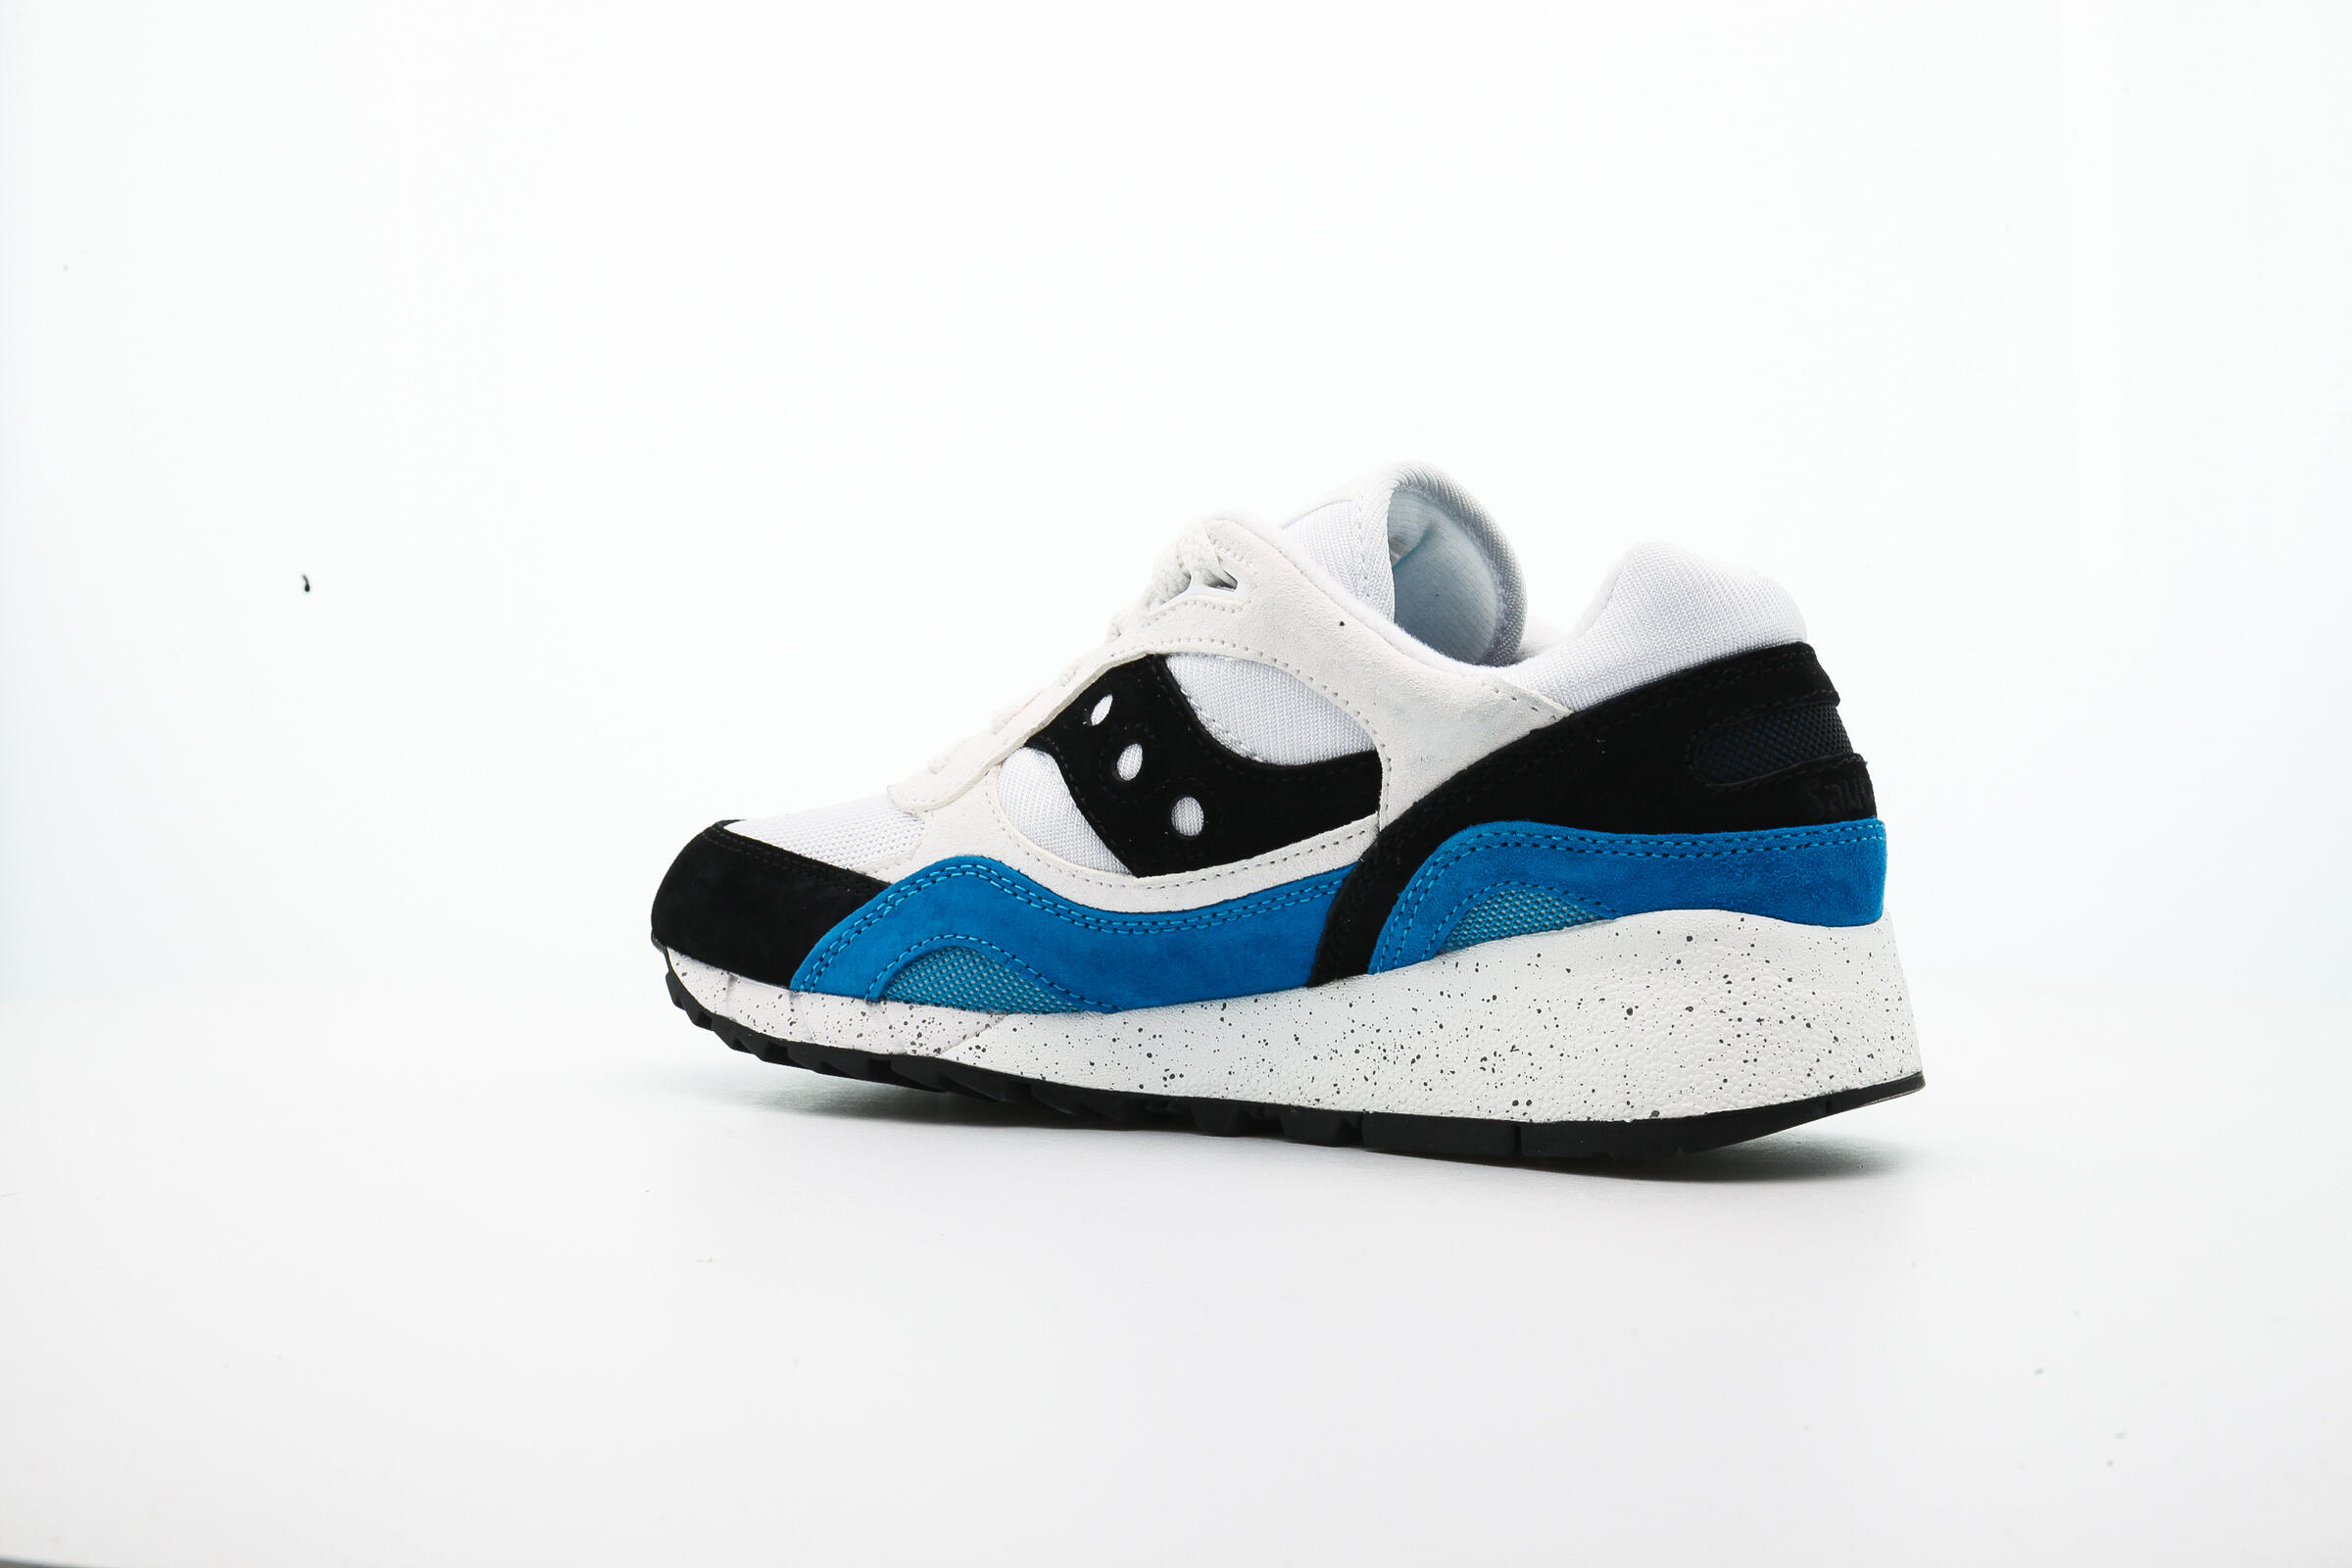 Saucony SHADOW 6000 "ENSIGN"